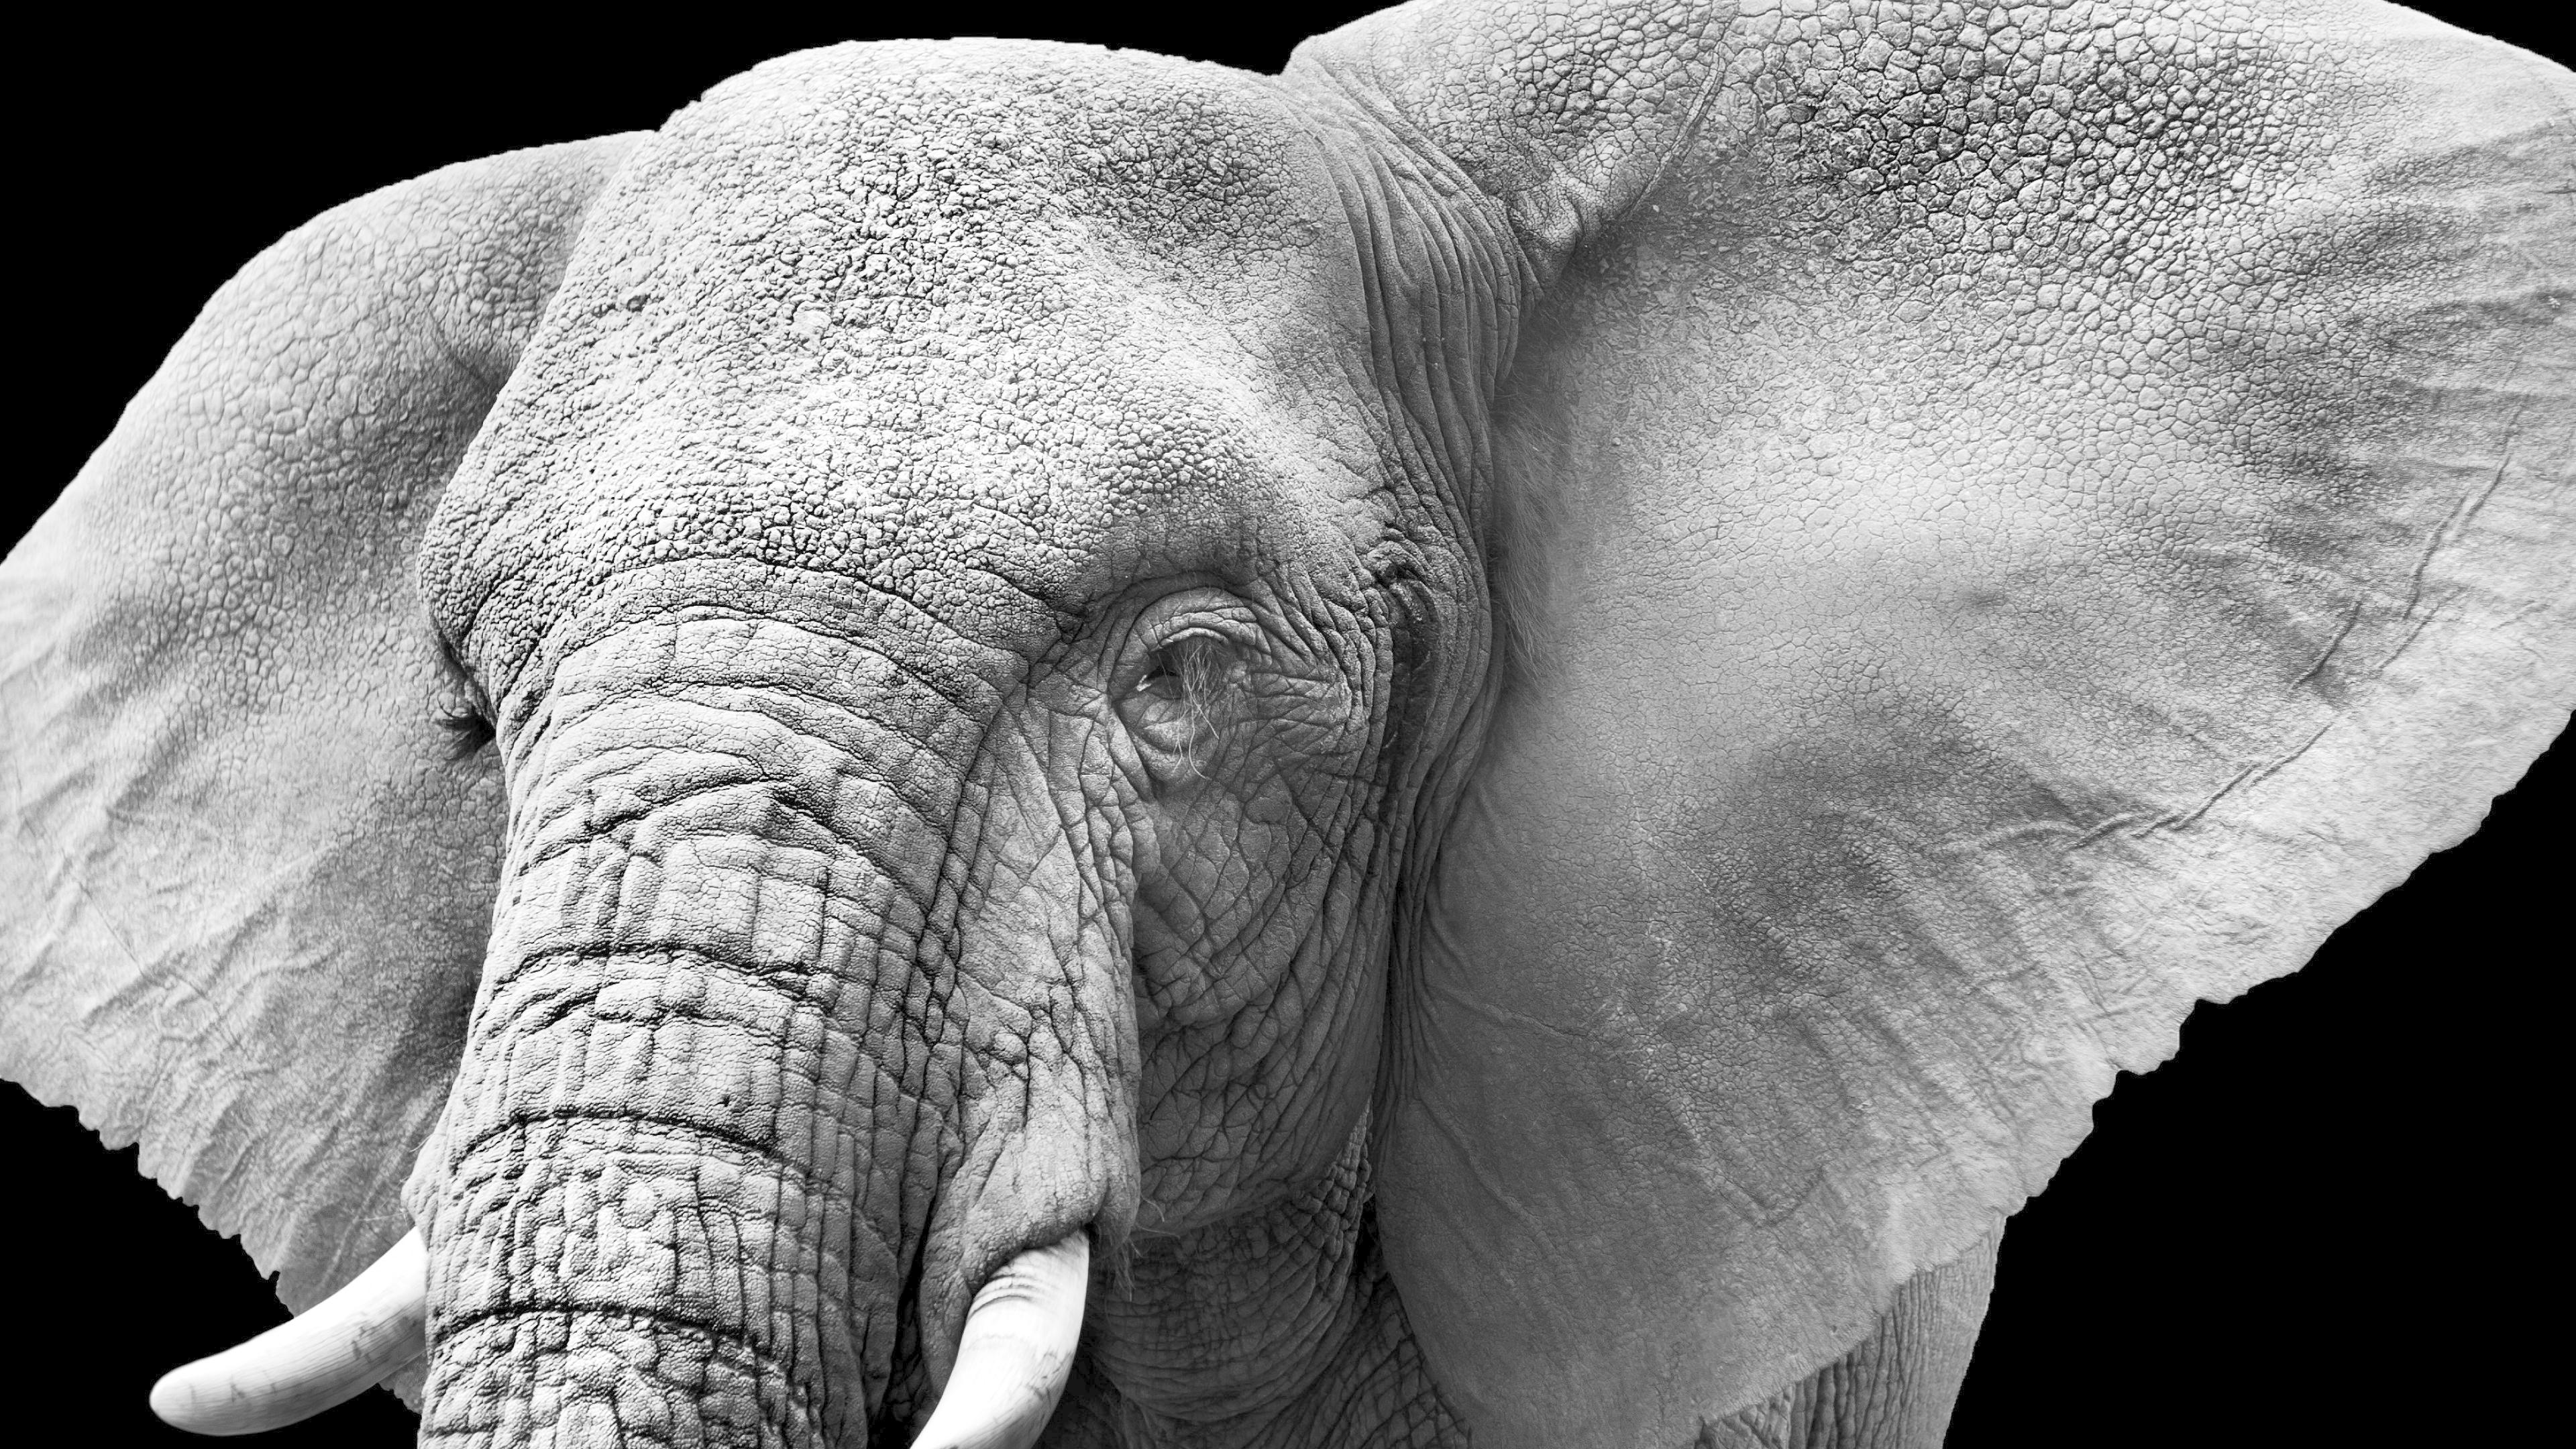 Elephant Wallpaper Hd 1080p - Elephant Close Up Black And White , HD Wallpaper & Backgrounds